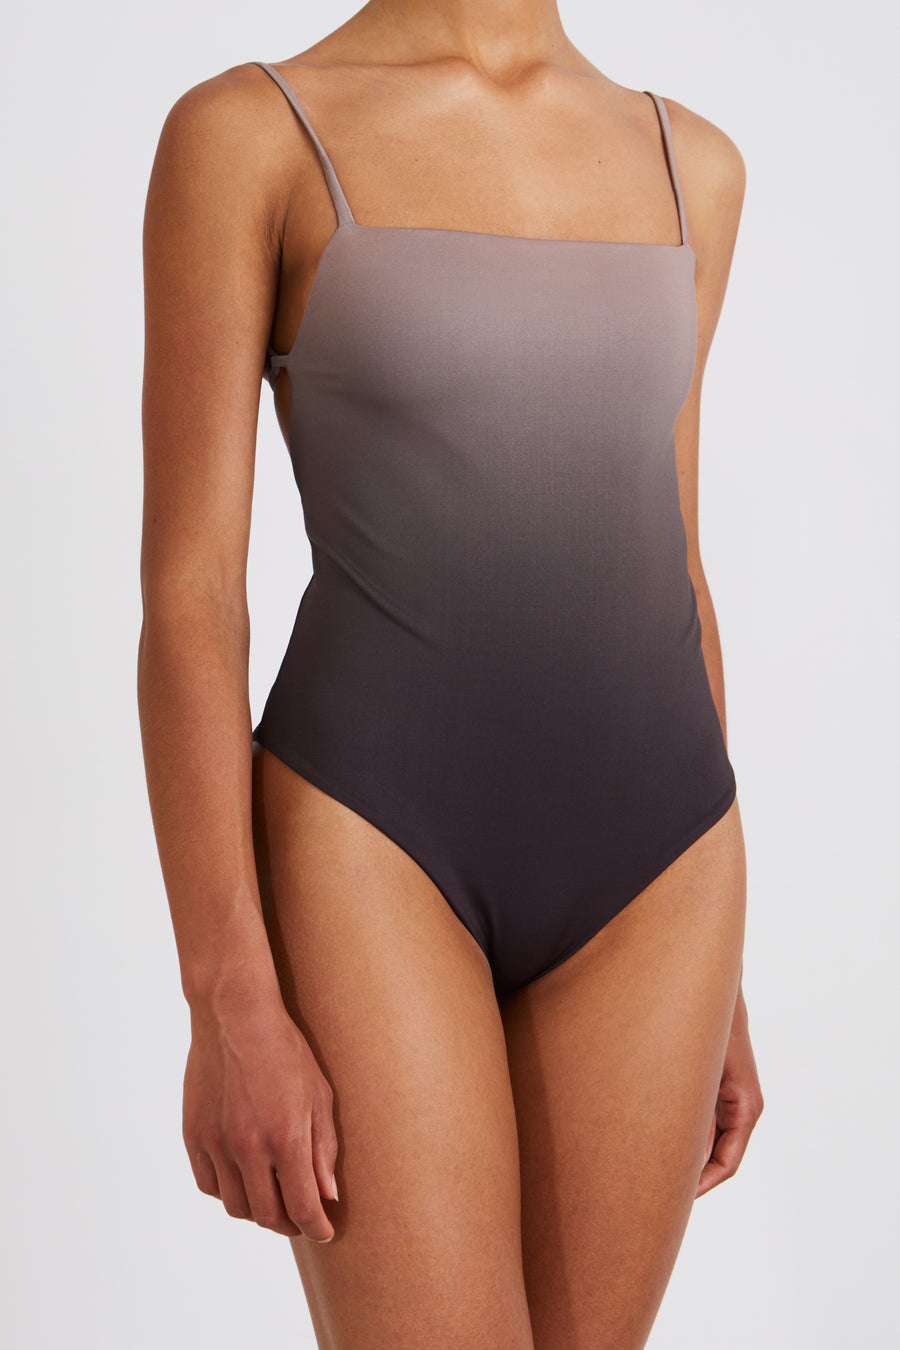 Swimsuit – edgy, earth